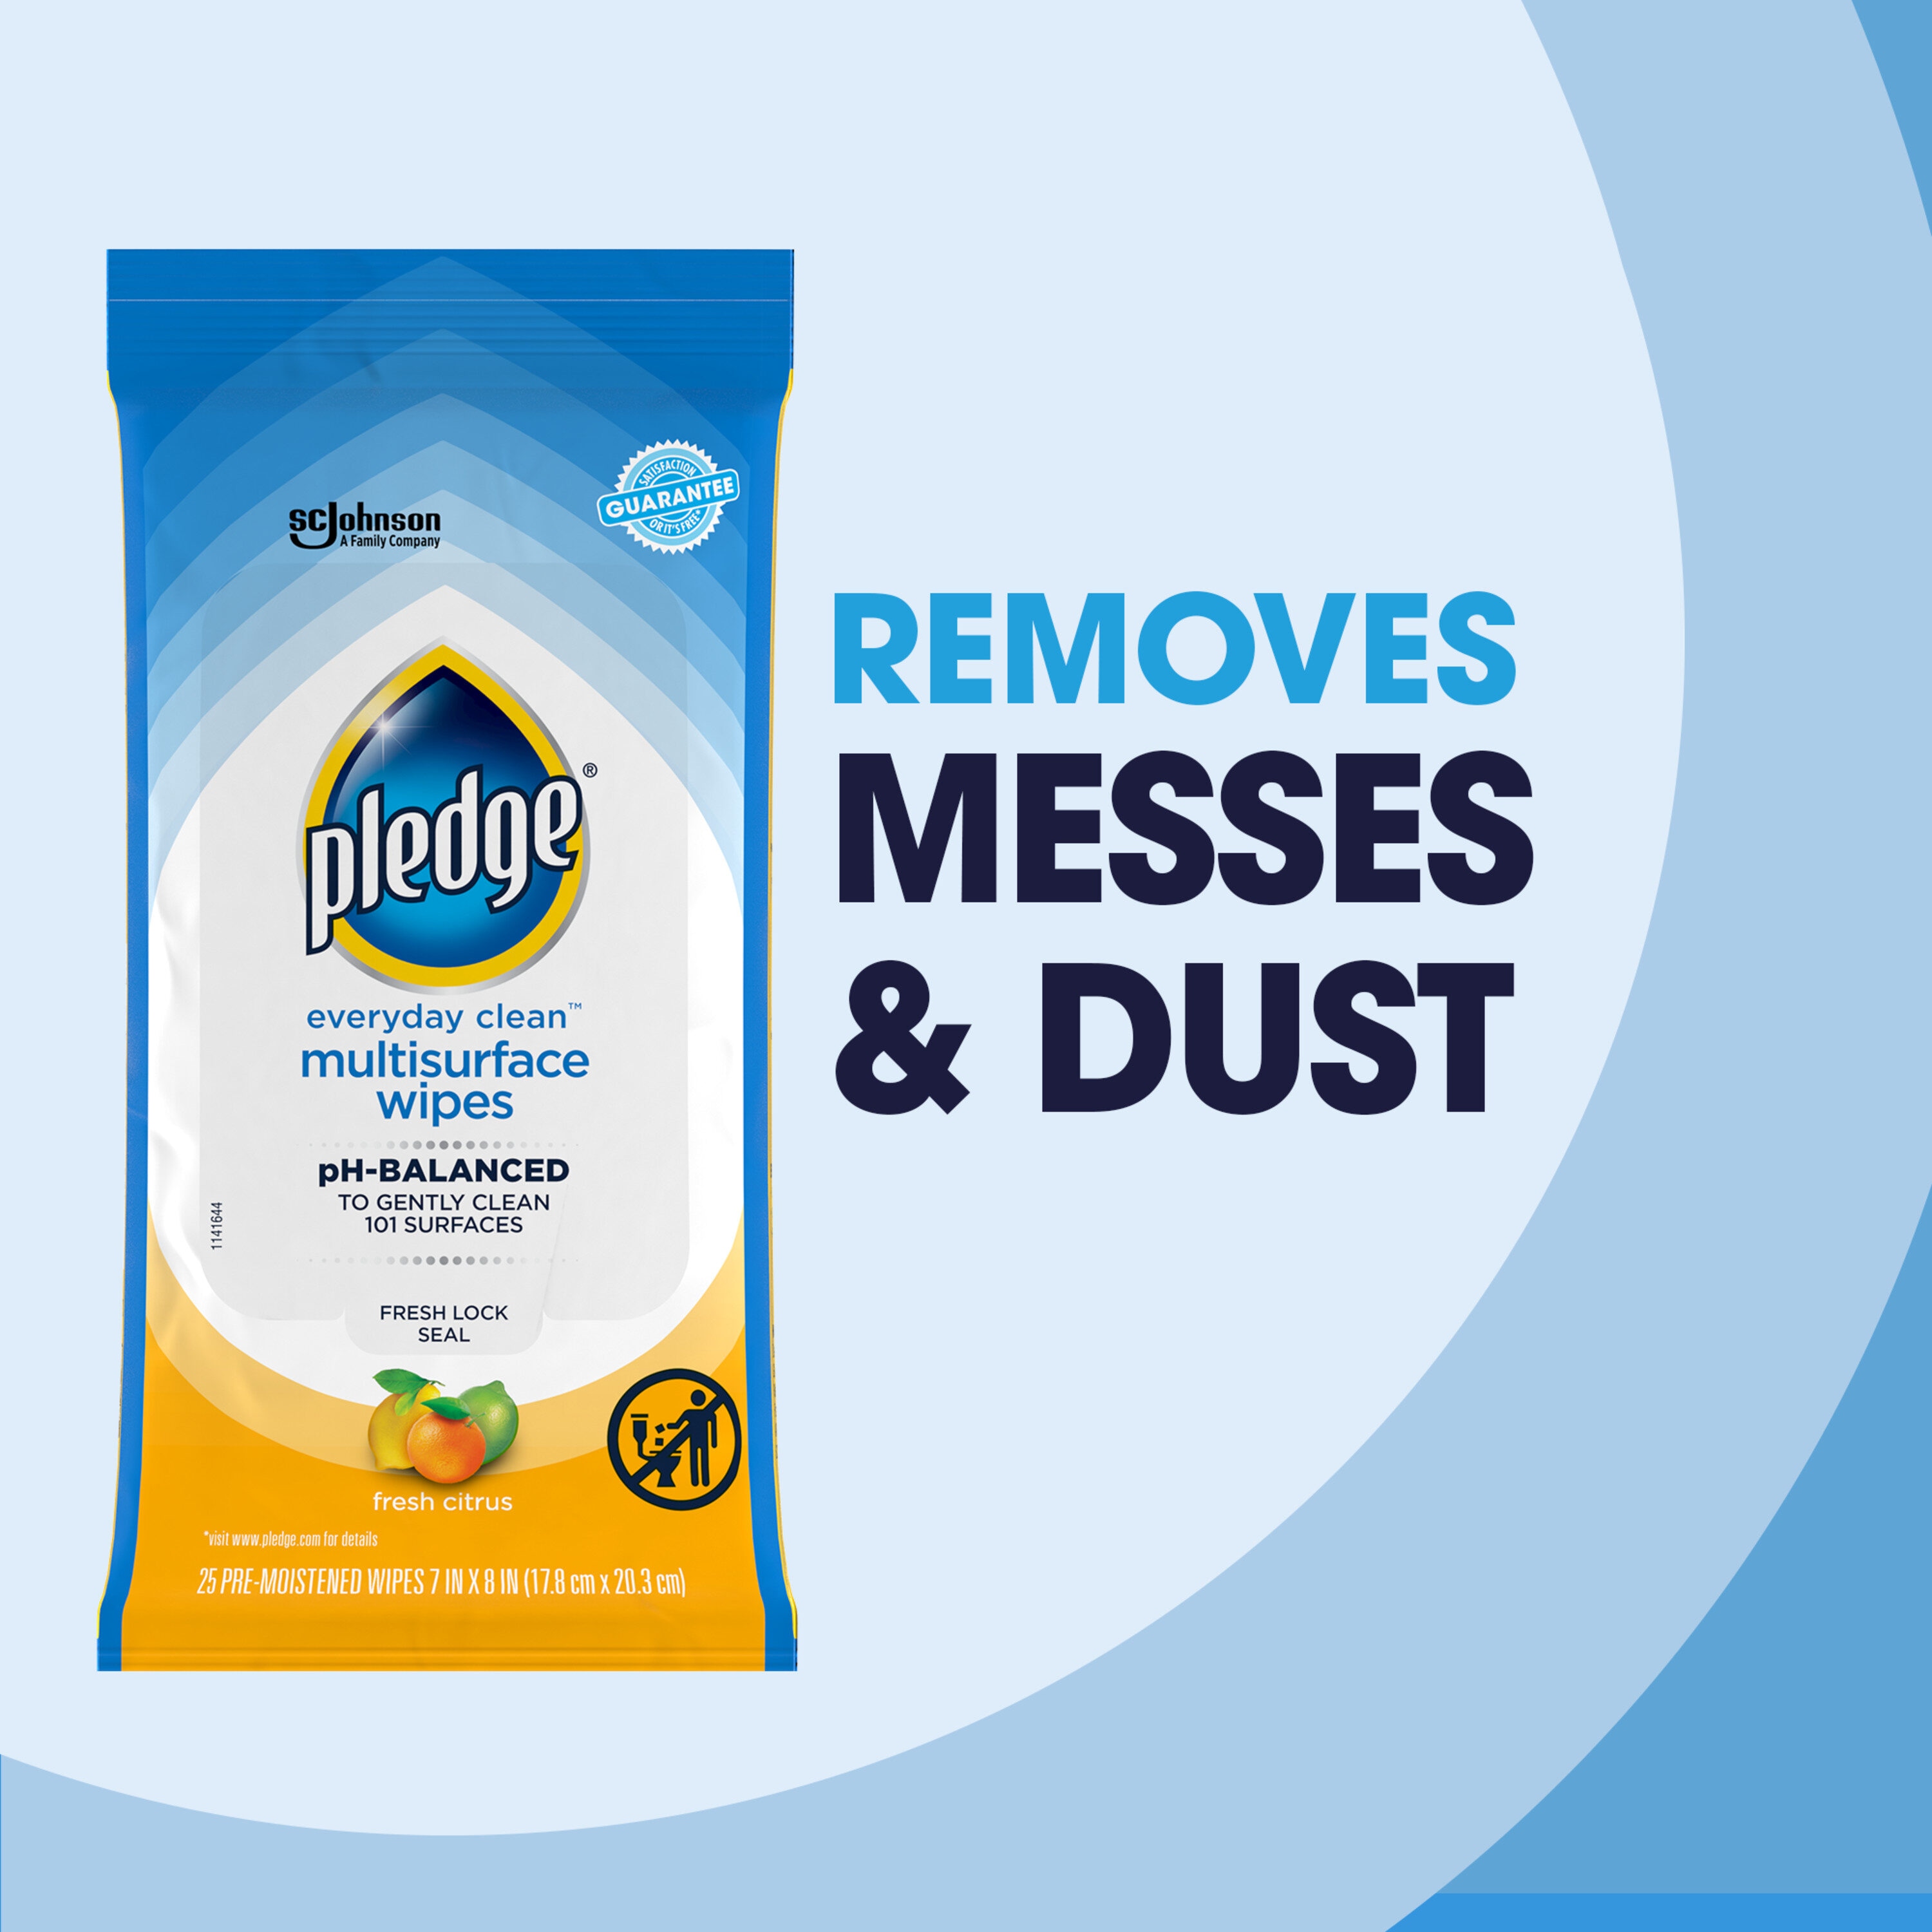 Pledge 25-Count Citrus Wipes All-Purpose Cleaner in the All